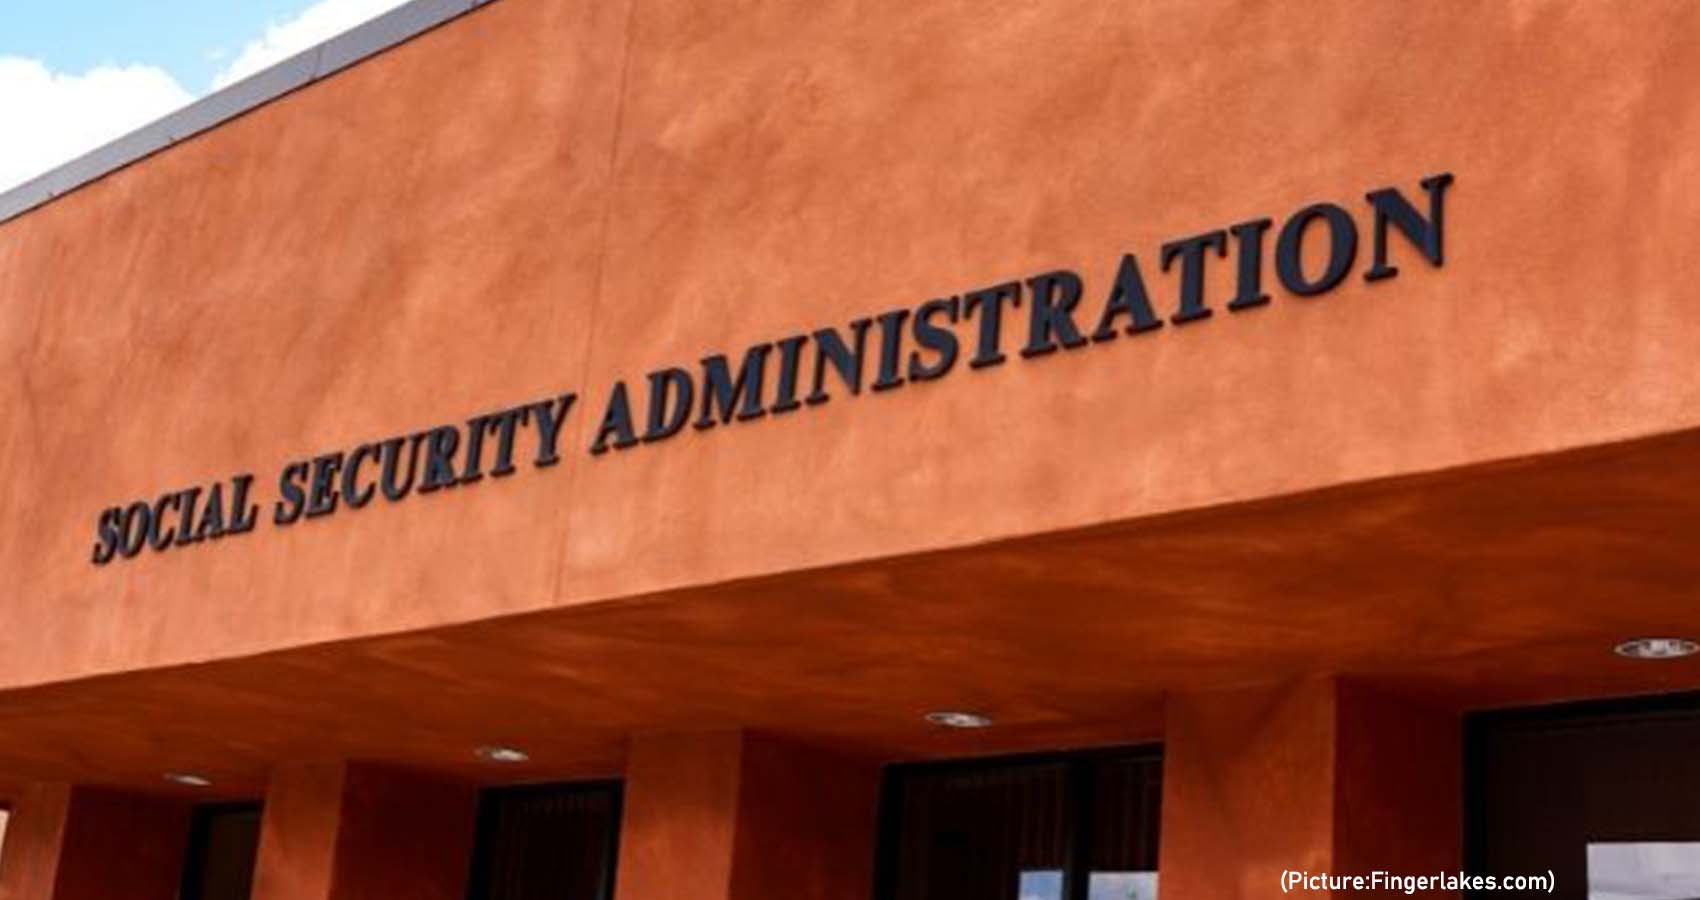 Social Security: Offices will reopen after 2 years this month